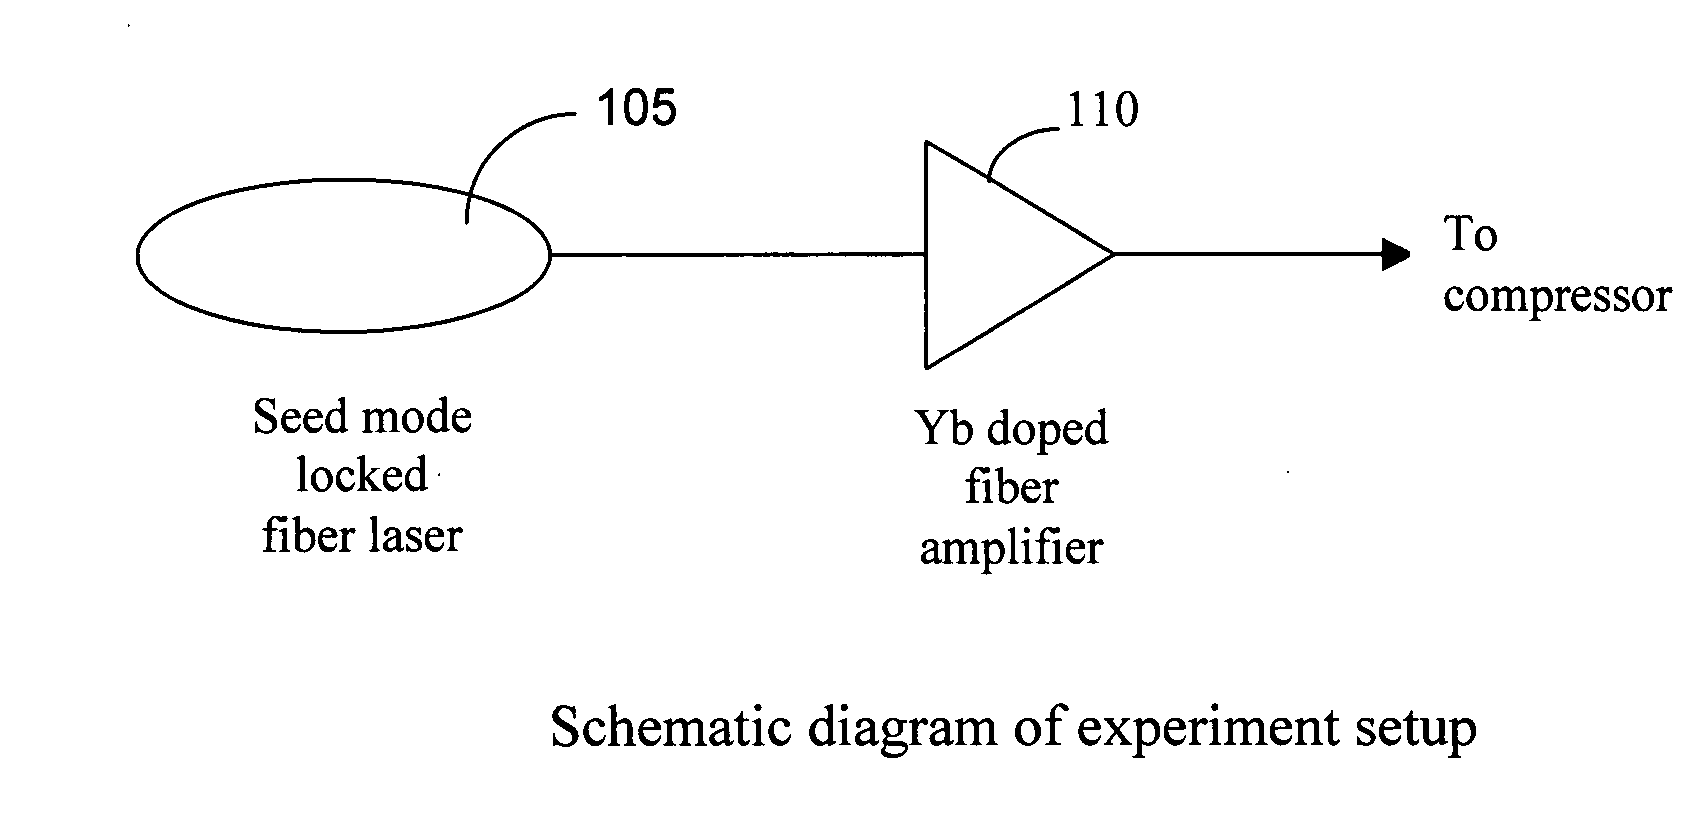 Reduction of pulse width by spectral broadening in amplification stage and after amplification stage